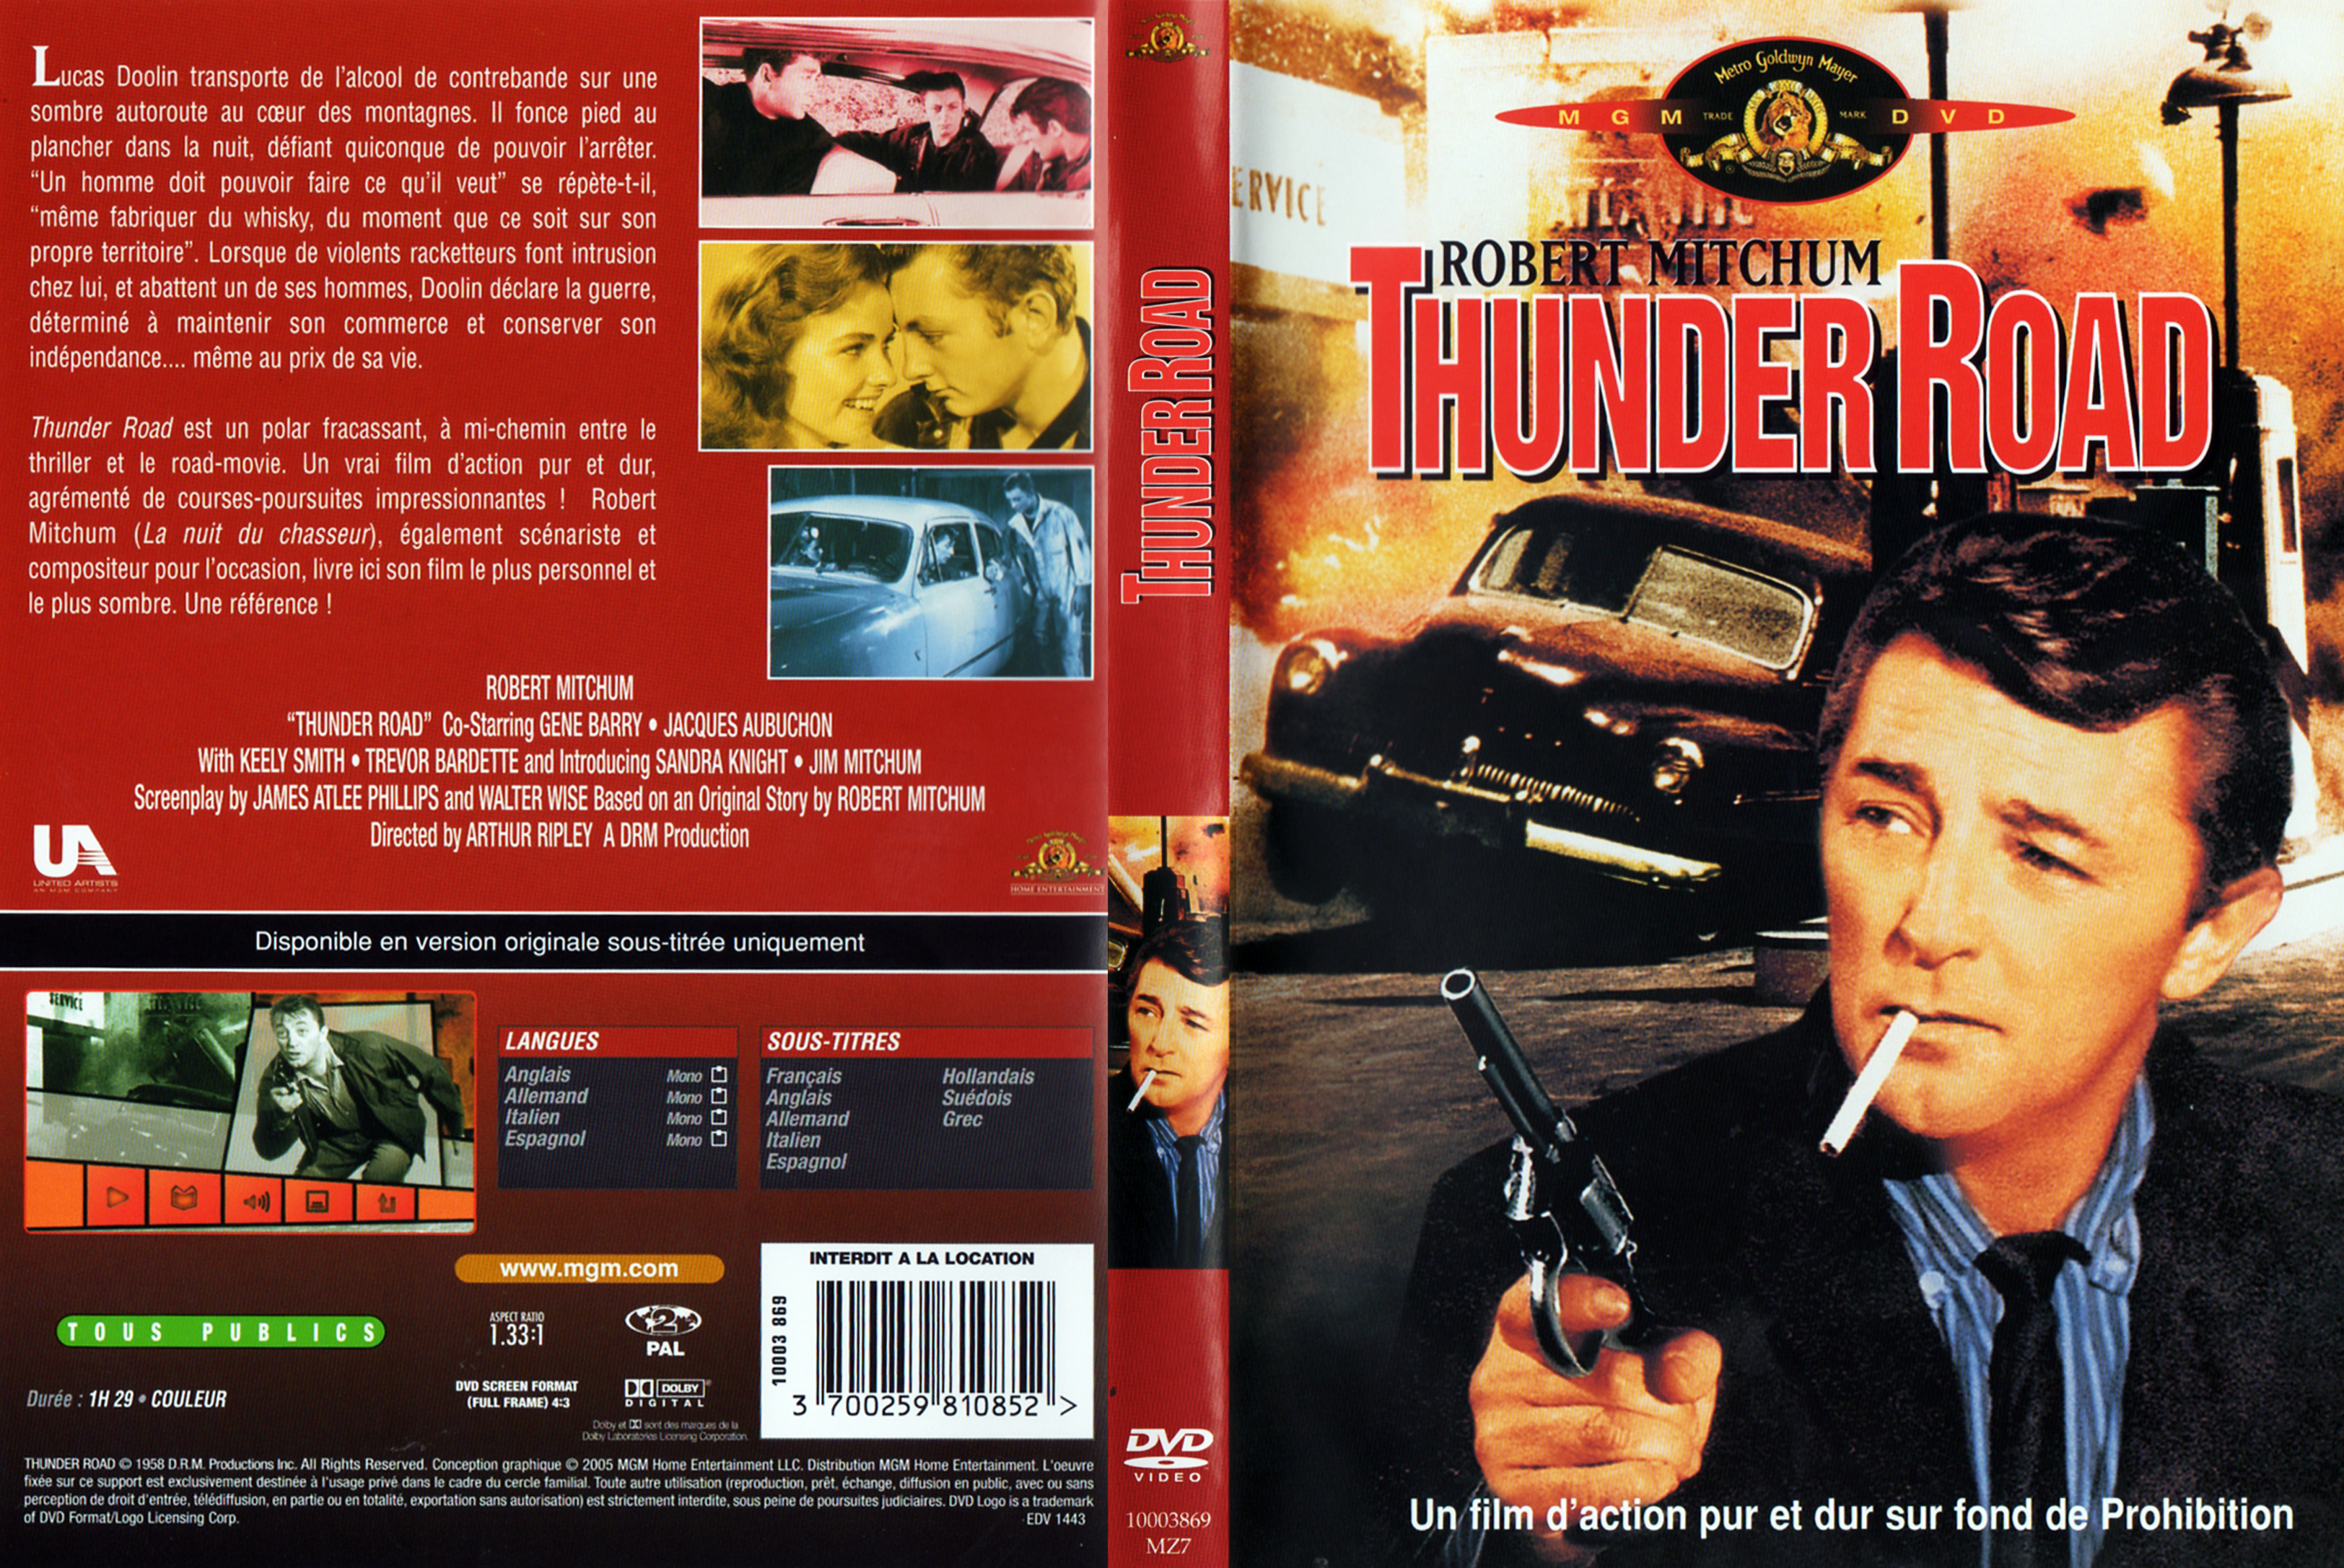 Jaquette DVD Thunder Road